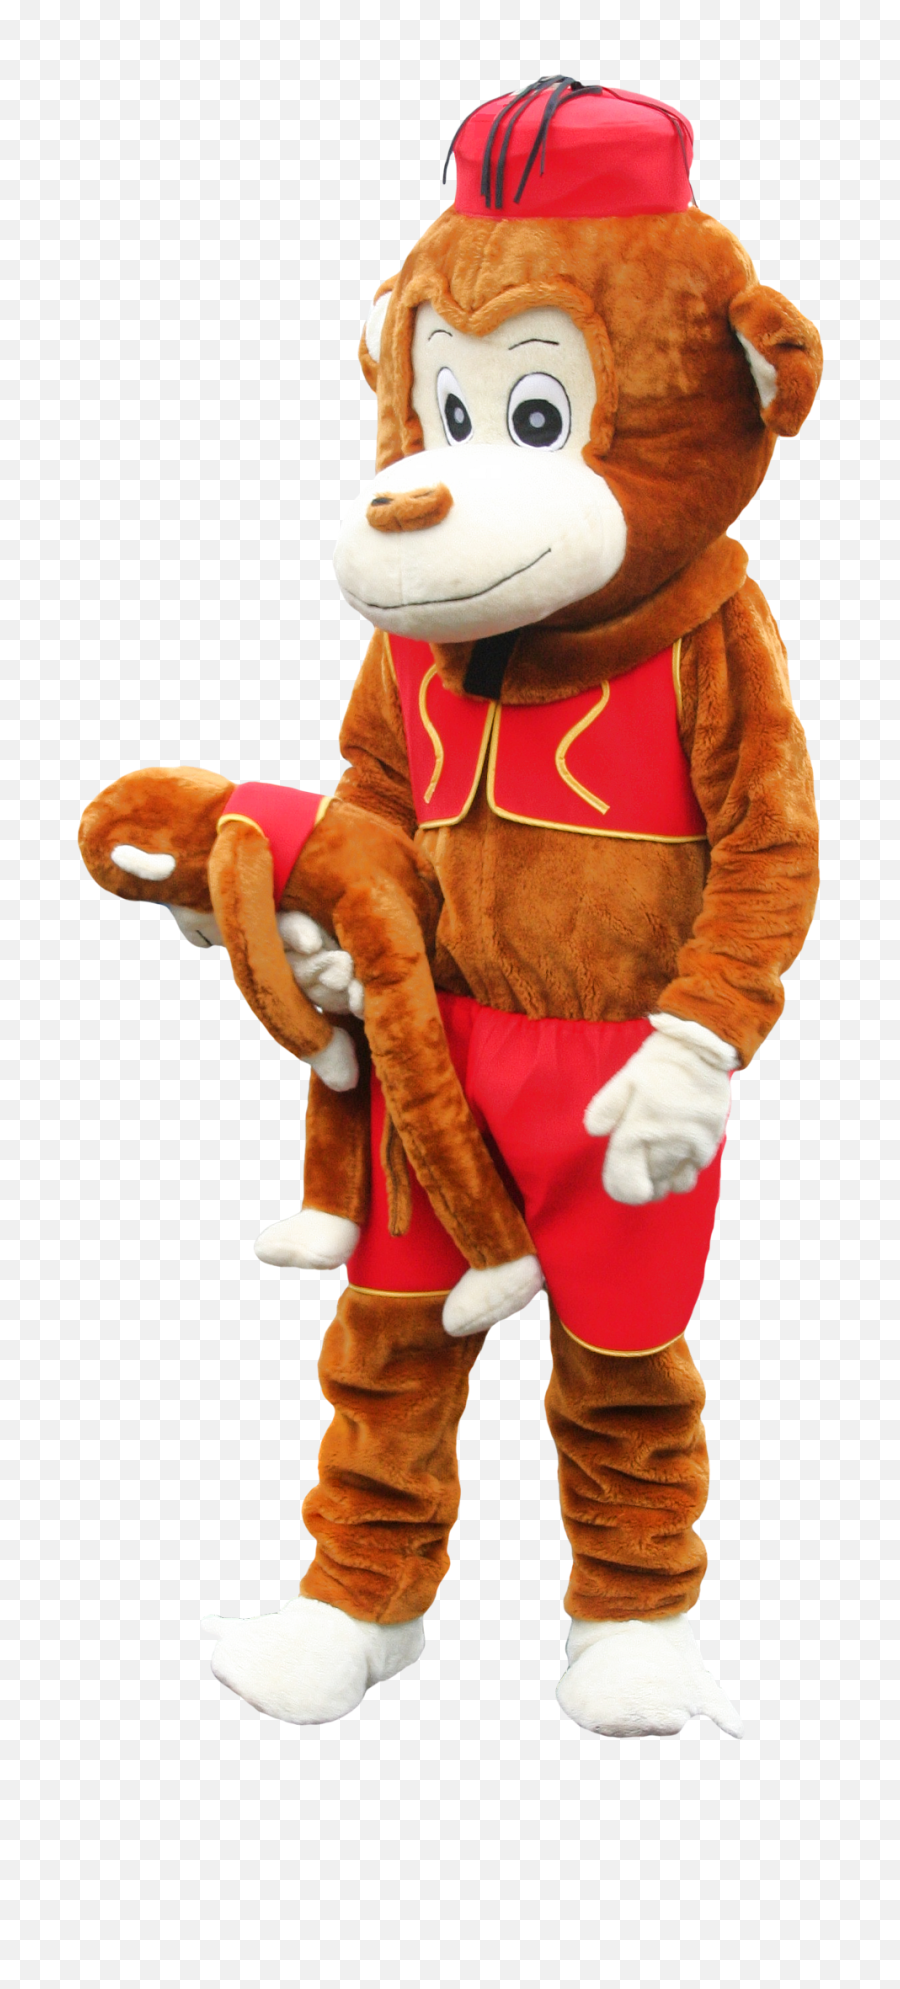 Monkey Toy Png Image - Purepng Free Transparent Cc0 Png Monkey Toy Png,Stuffed Animal Png